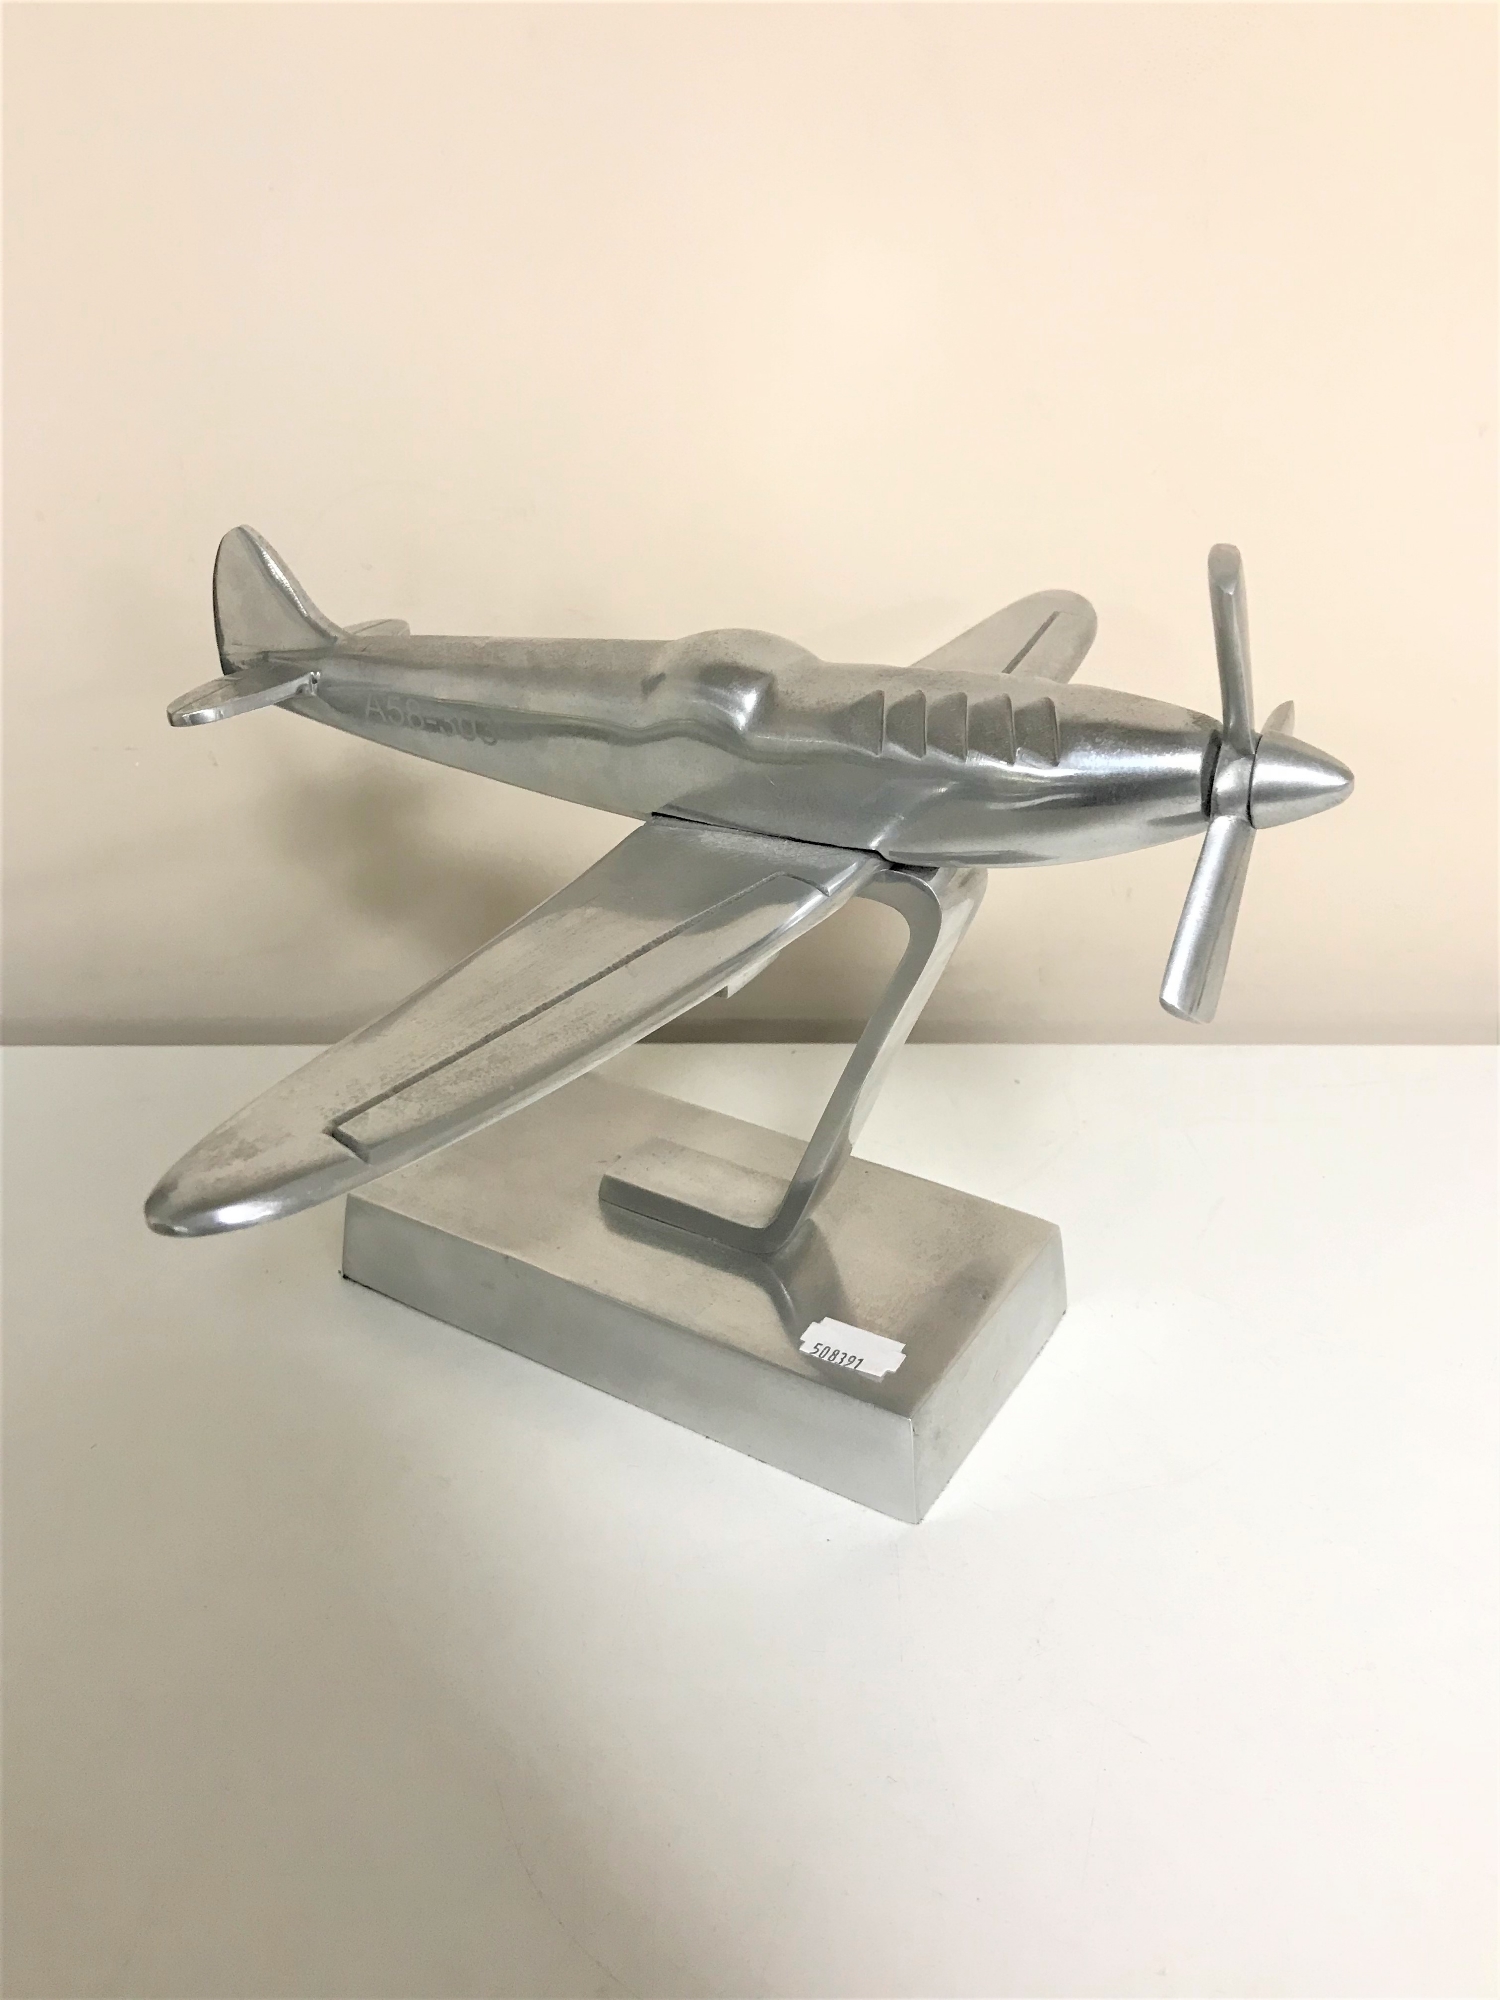 A metal model of a spitfire marked A58-303